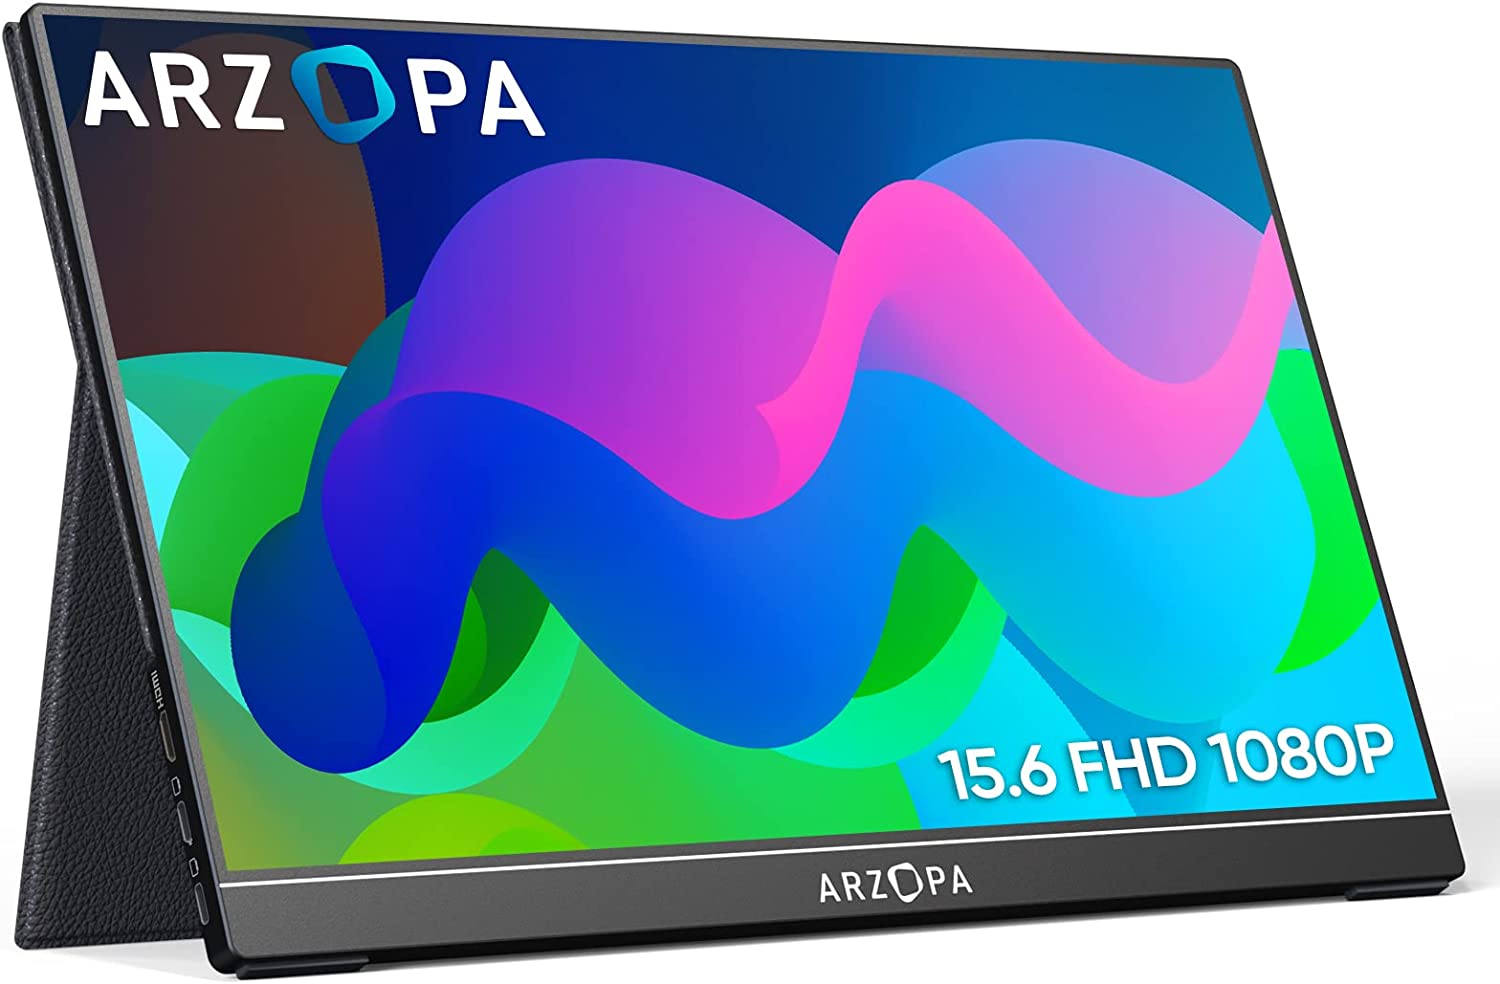 15.6" ARZOPA 1920x1080 60Hz Portable IPS External Monitor w/ Cover $76 + Free Shipping (Select Locations)